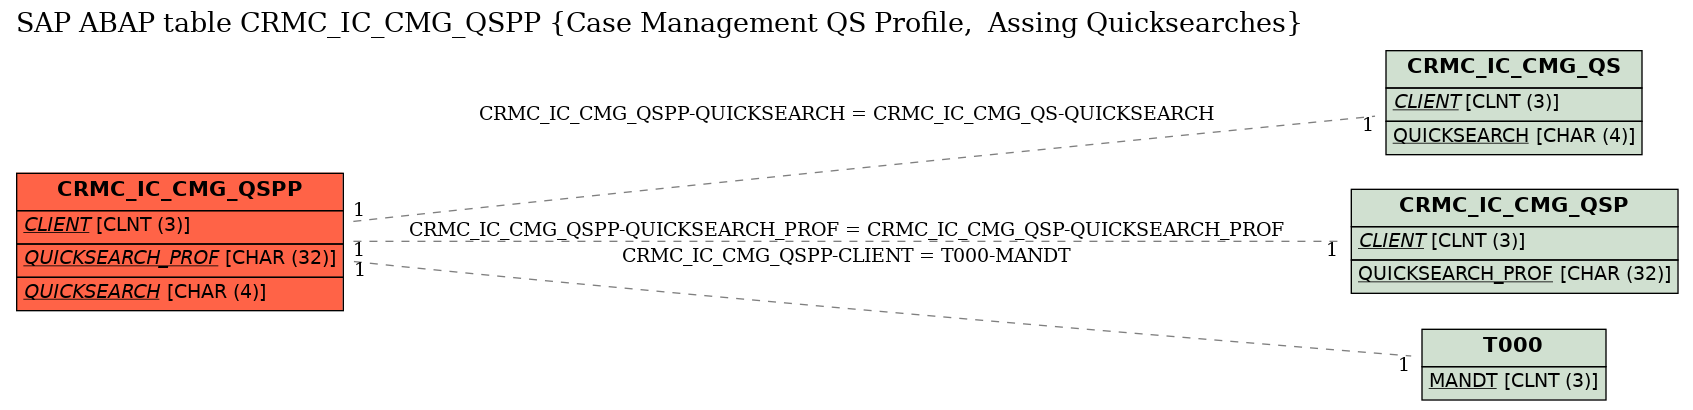 E-R Diagram for table CRMC_IC_CMG_QSPP (Case Management QS Profile,  Assing Quicksearches)